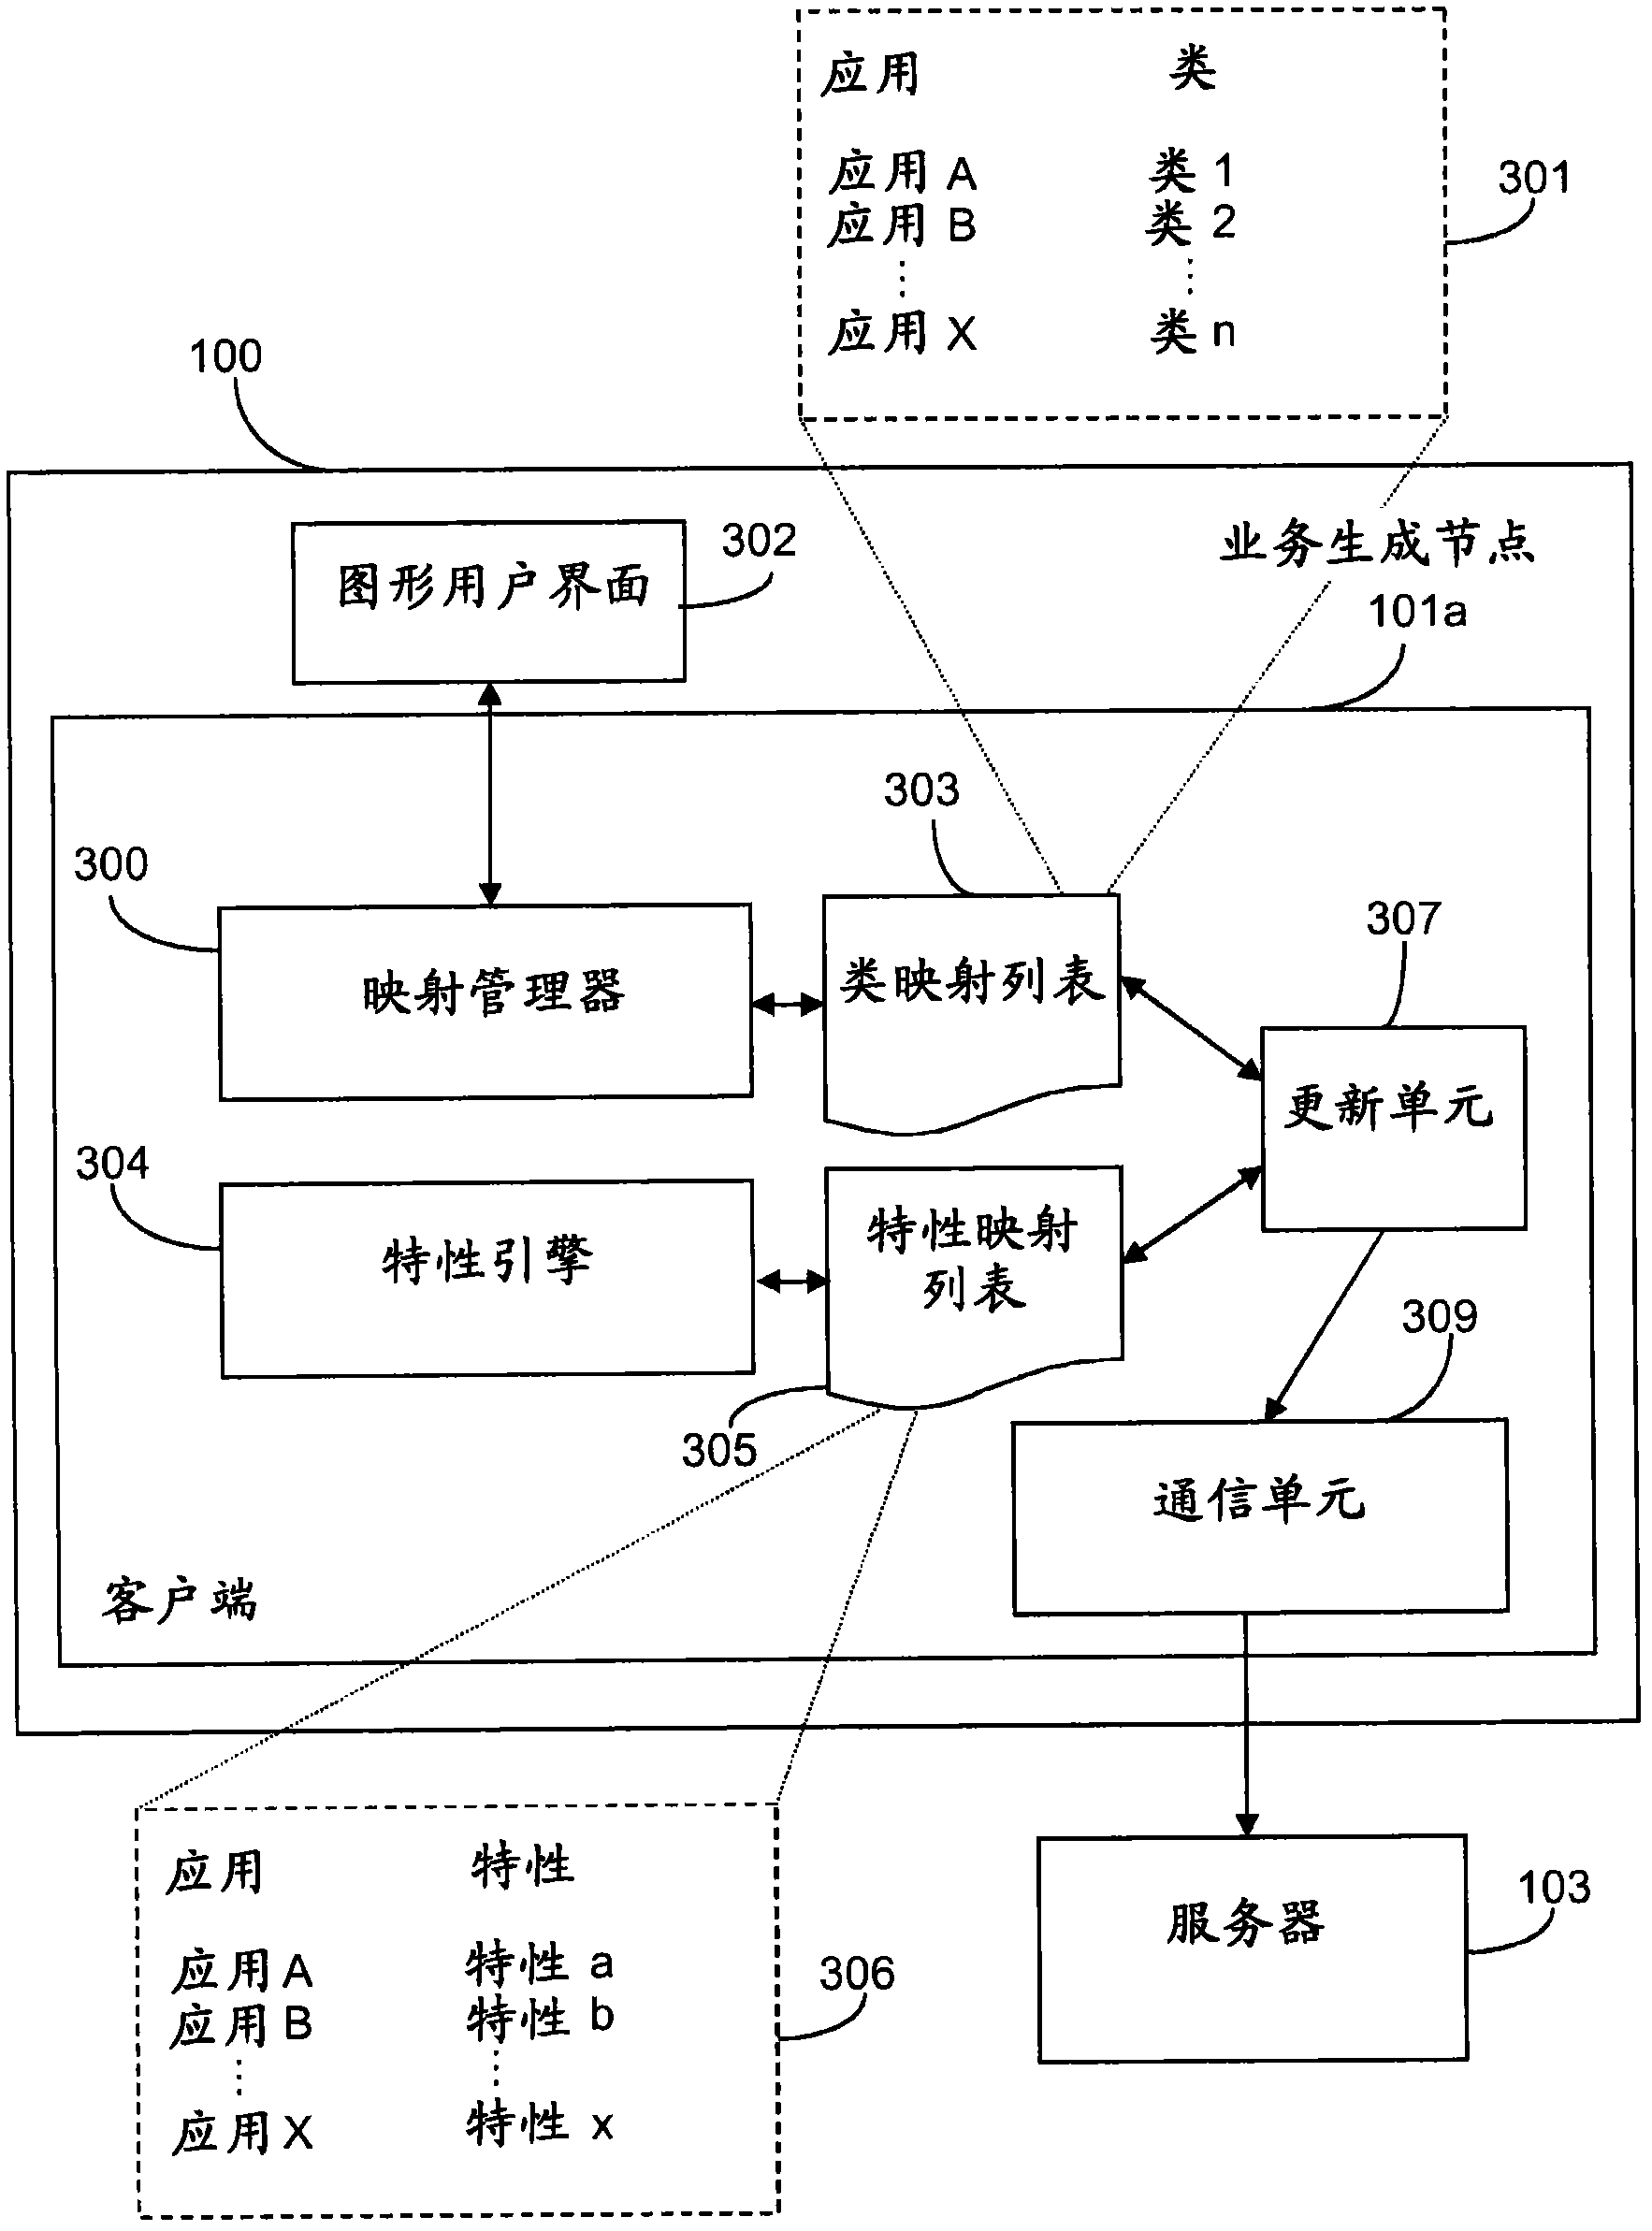 Method and device for enabling user service classification configuration